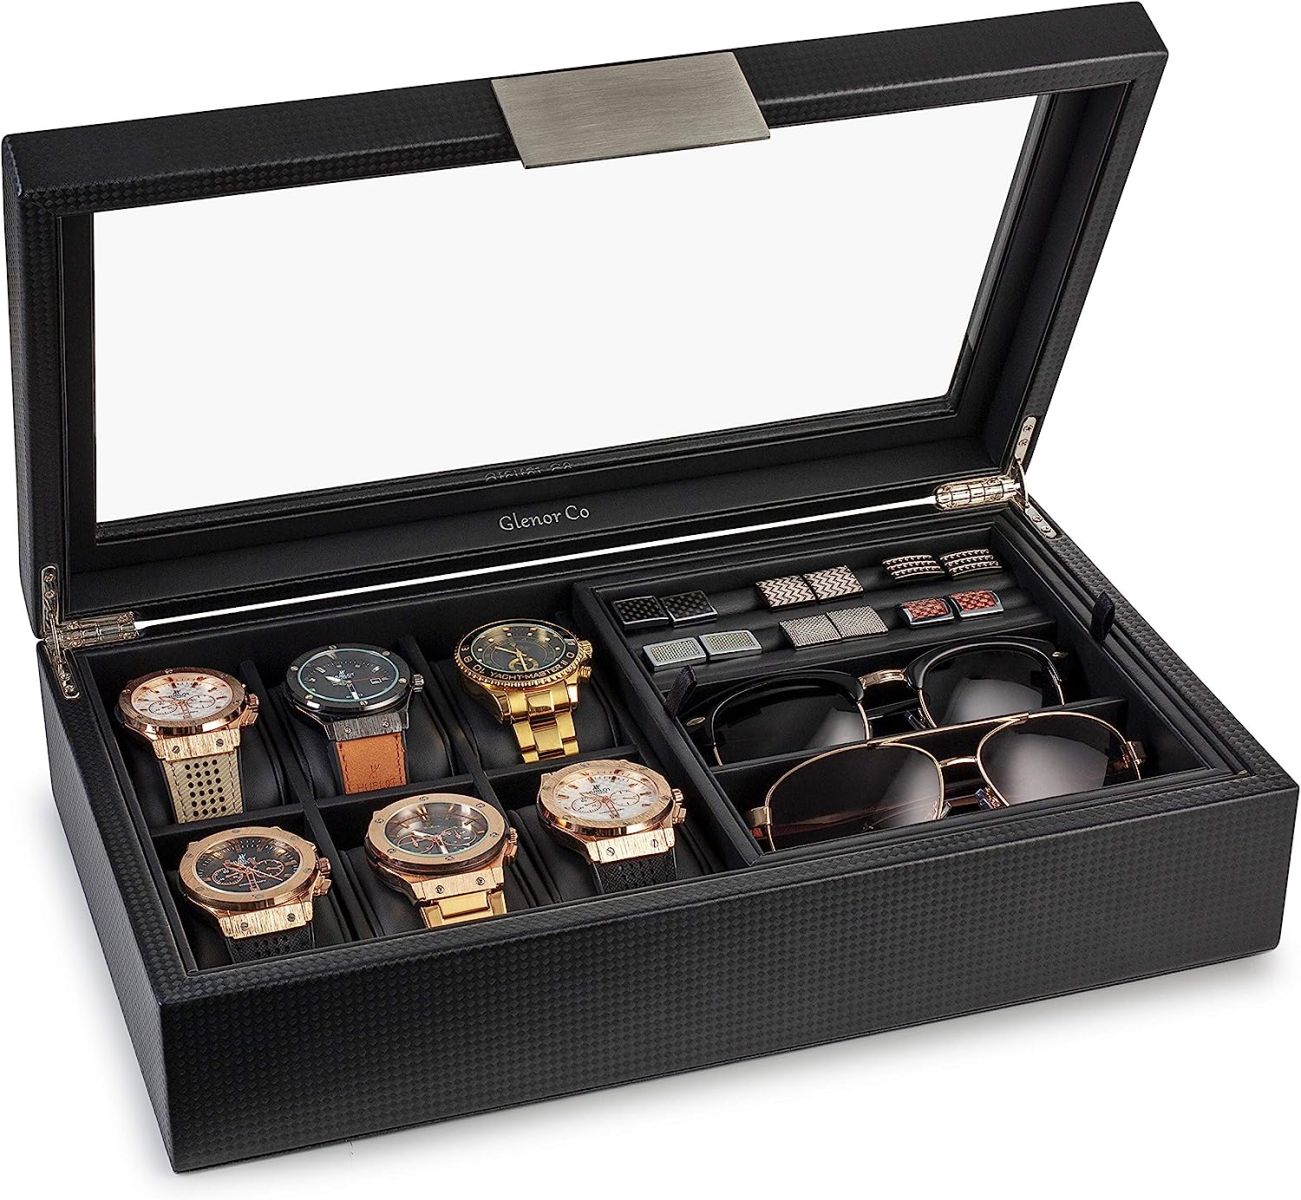 Glenor Co Valet Jewelry Box for Men - Holds 6 Watches, 12 cufflinks, 2 Sunglasses & Tray Storage - Mens Watch Case - CarbonFiber Organizer w Metal Accents, PU Leather & Large Glass Lid - Black